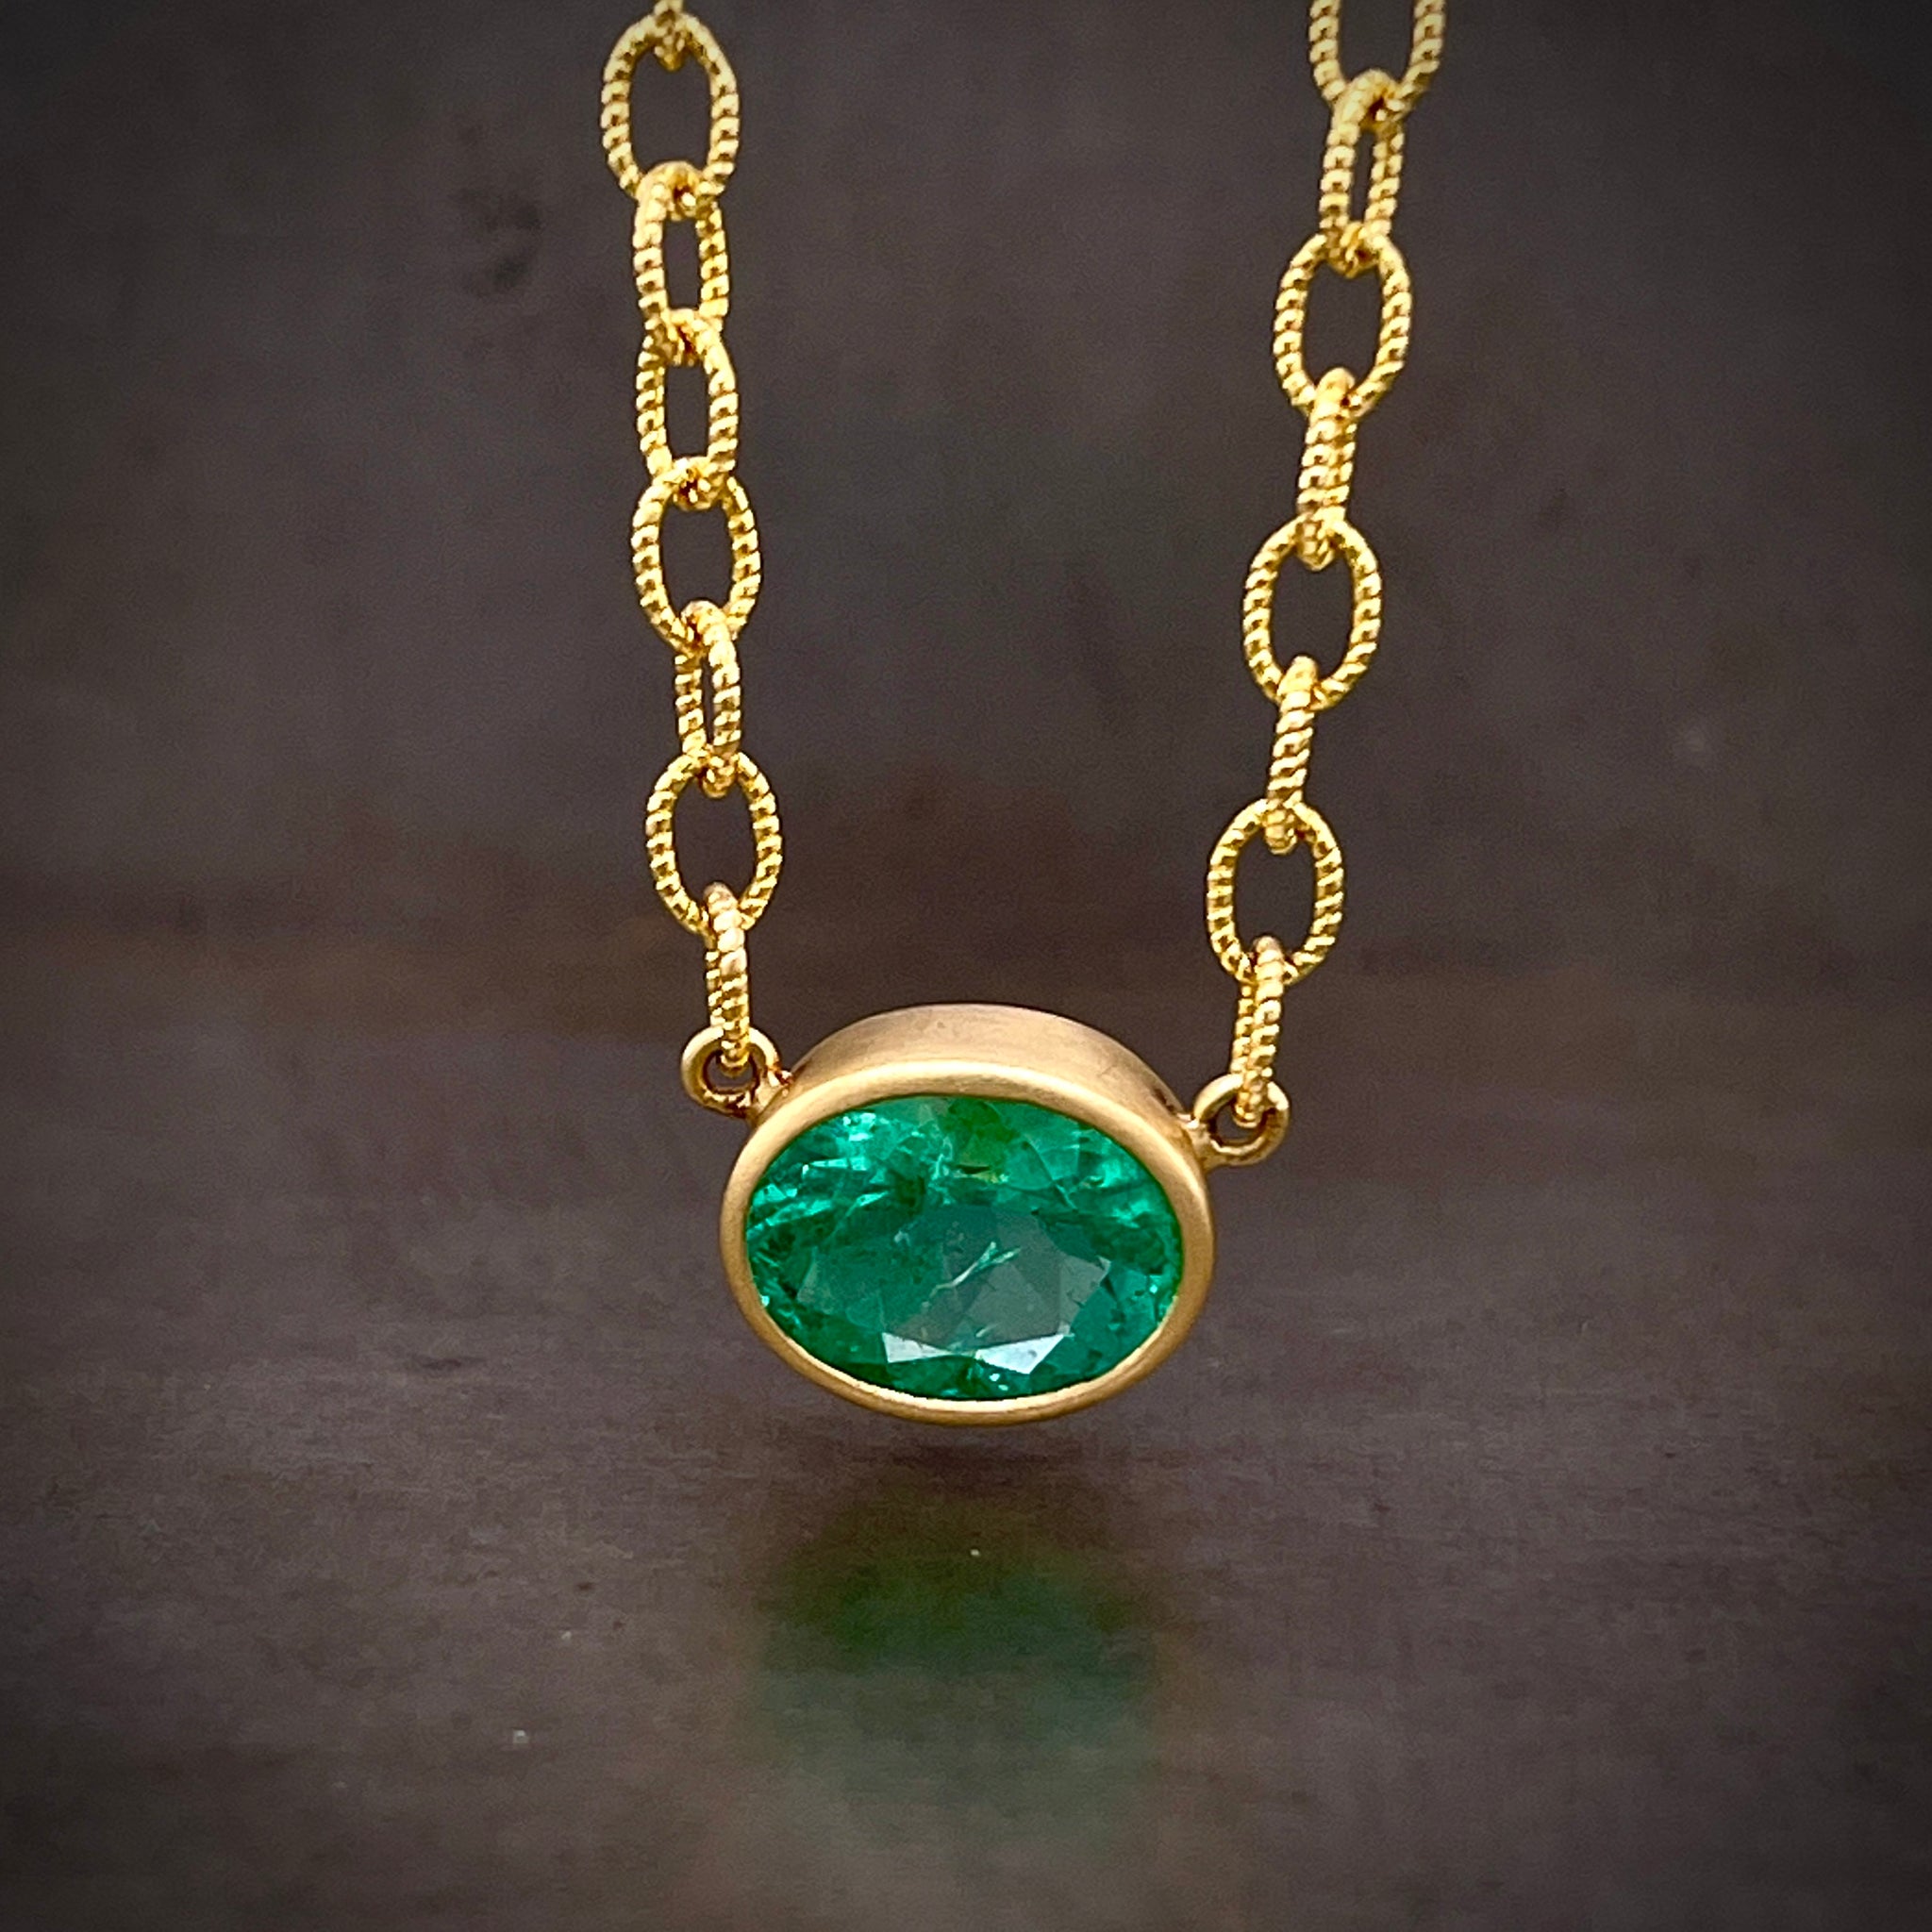 Front View of 18k Yellow Gold Emerald Necklace